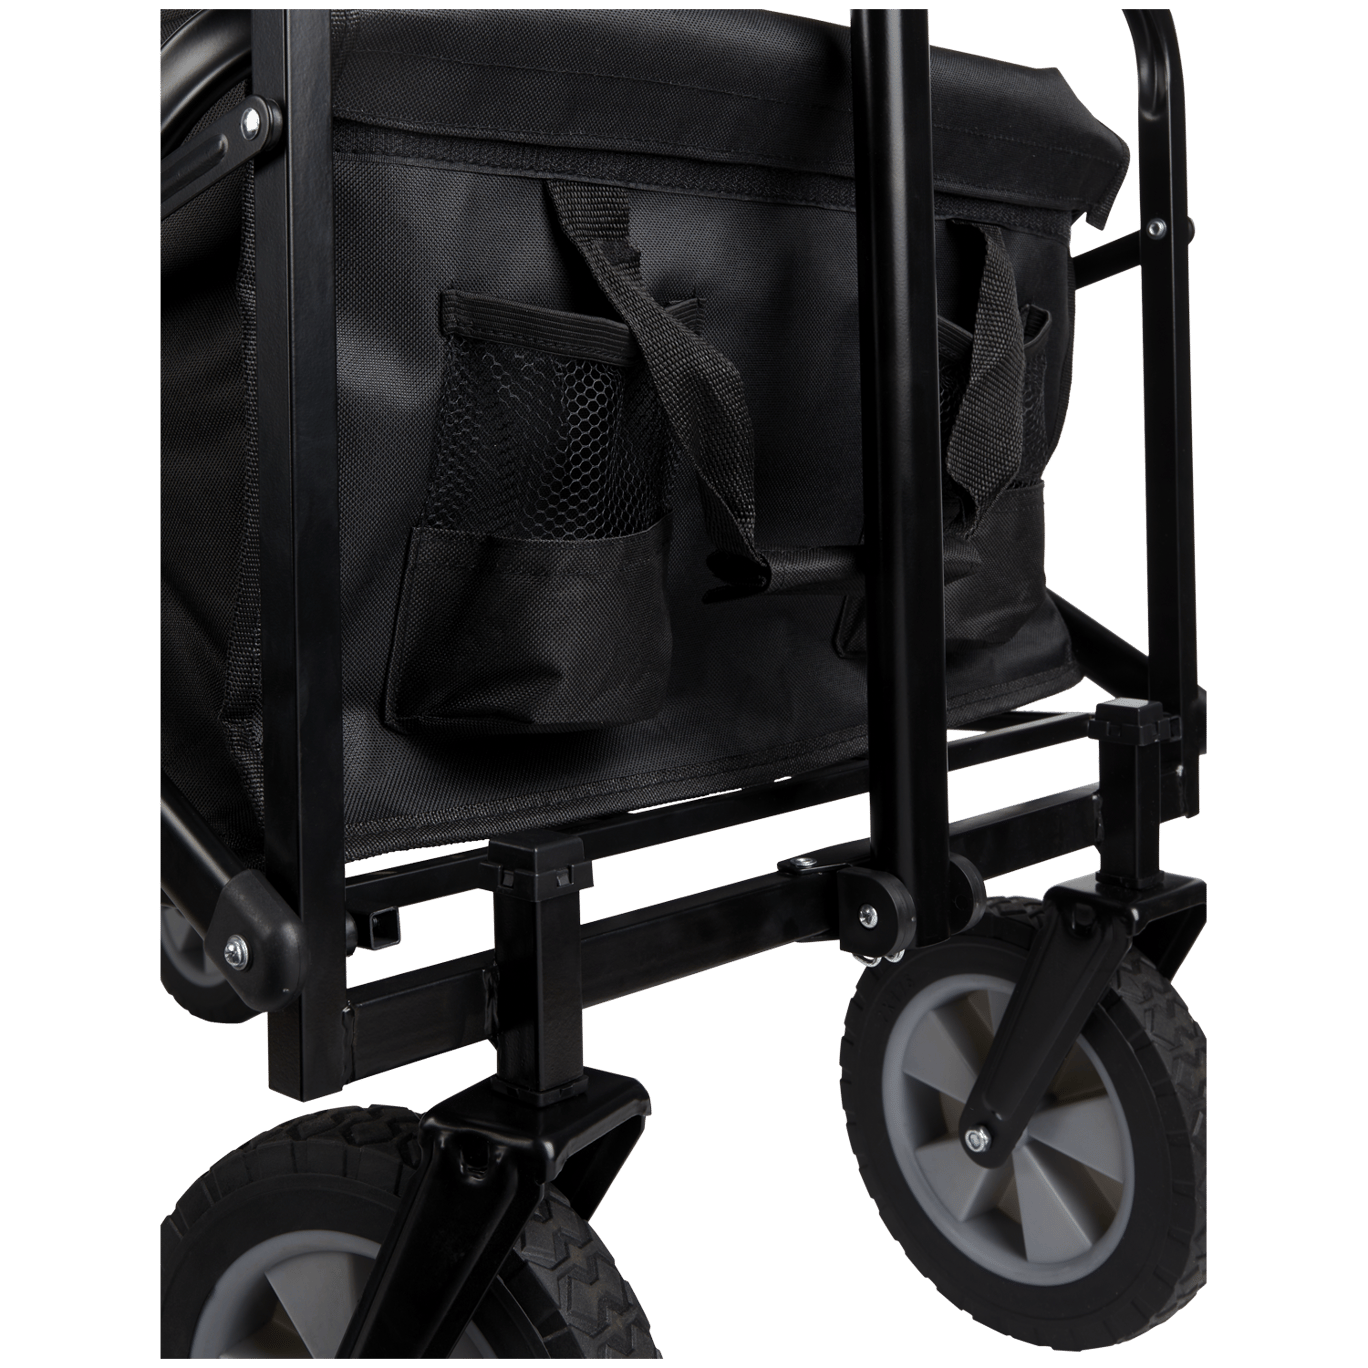 Chariot pliable Froyak